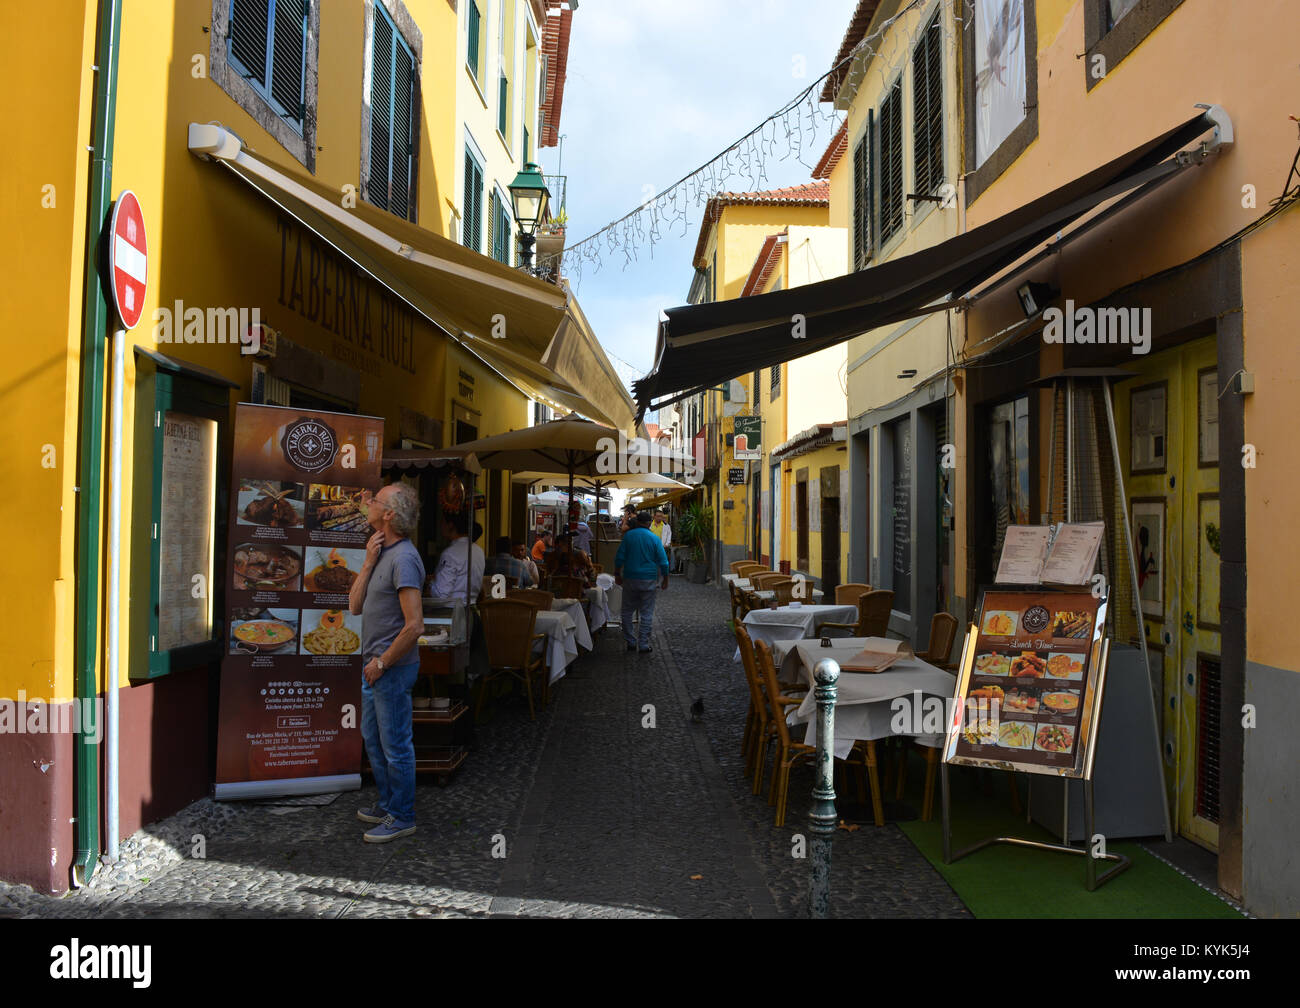 Restaurant in Rua de Santa Maria, a public art space to revitalise an old, neglected street in the Old Town of Funchal, Madeira, Portugal Stock Photo